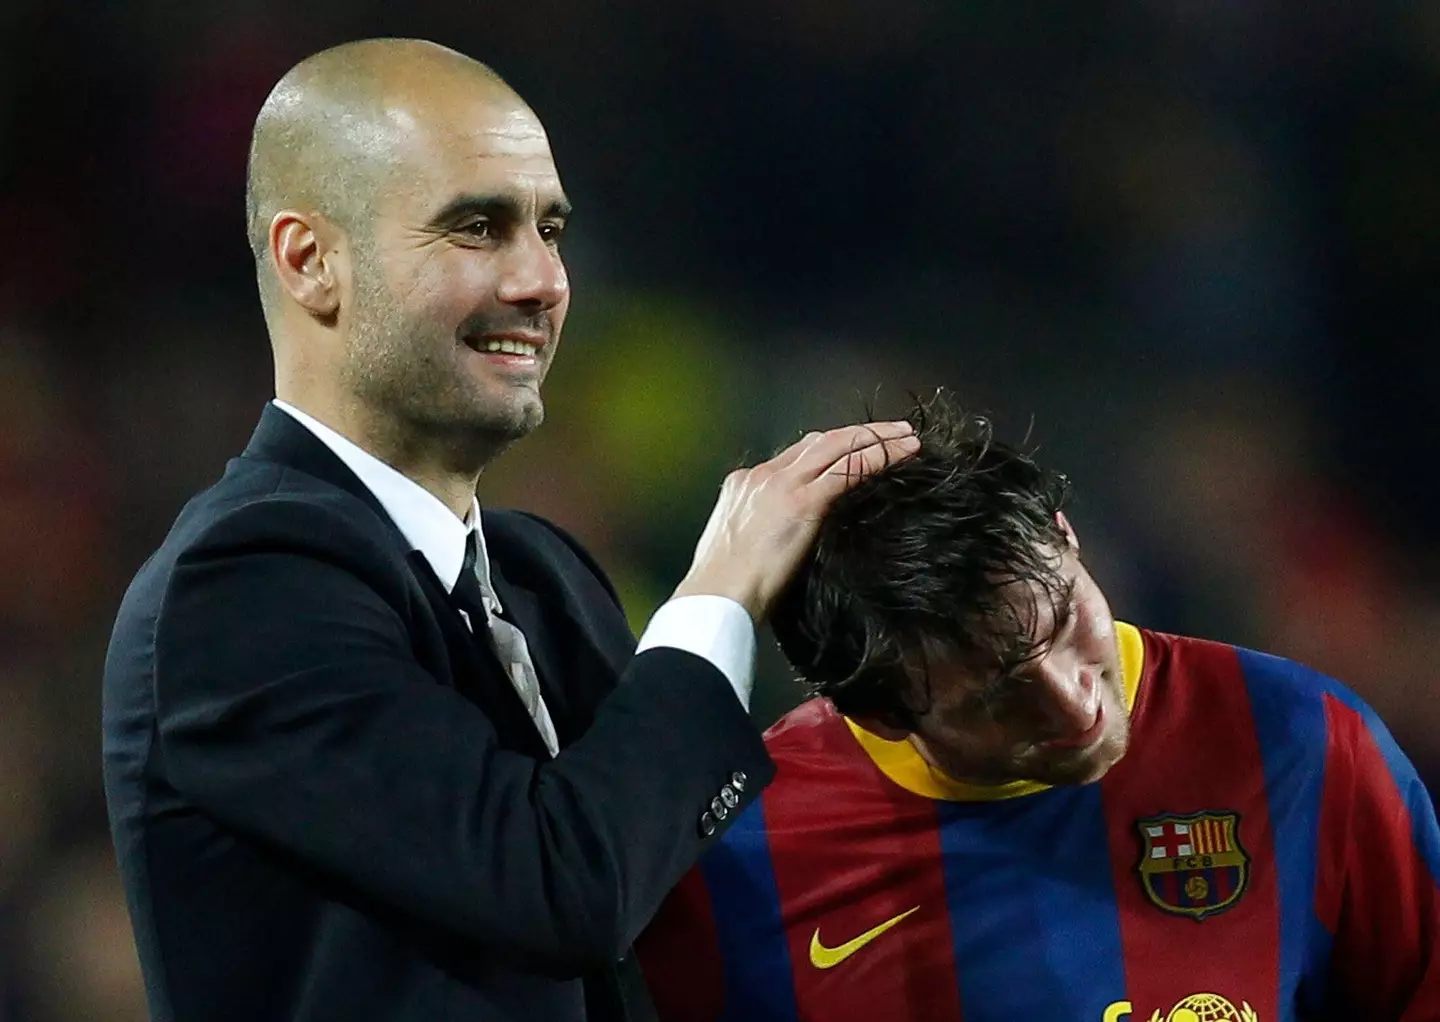 Guardiola with Messi in 2011. (Image